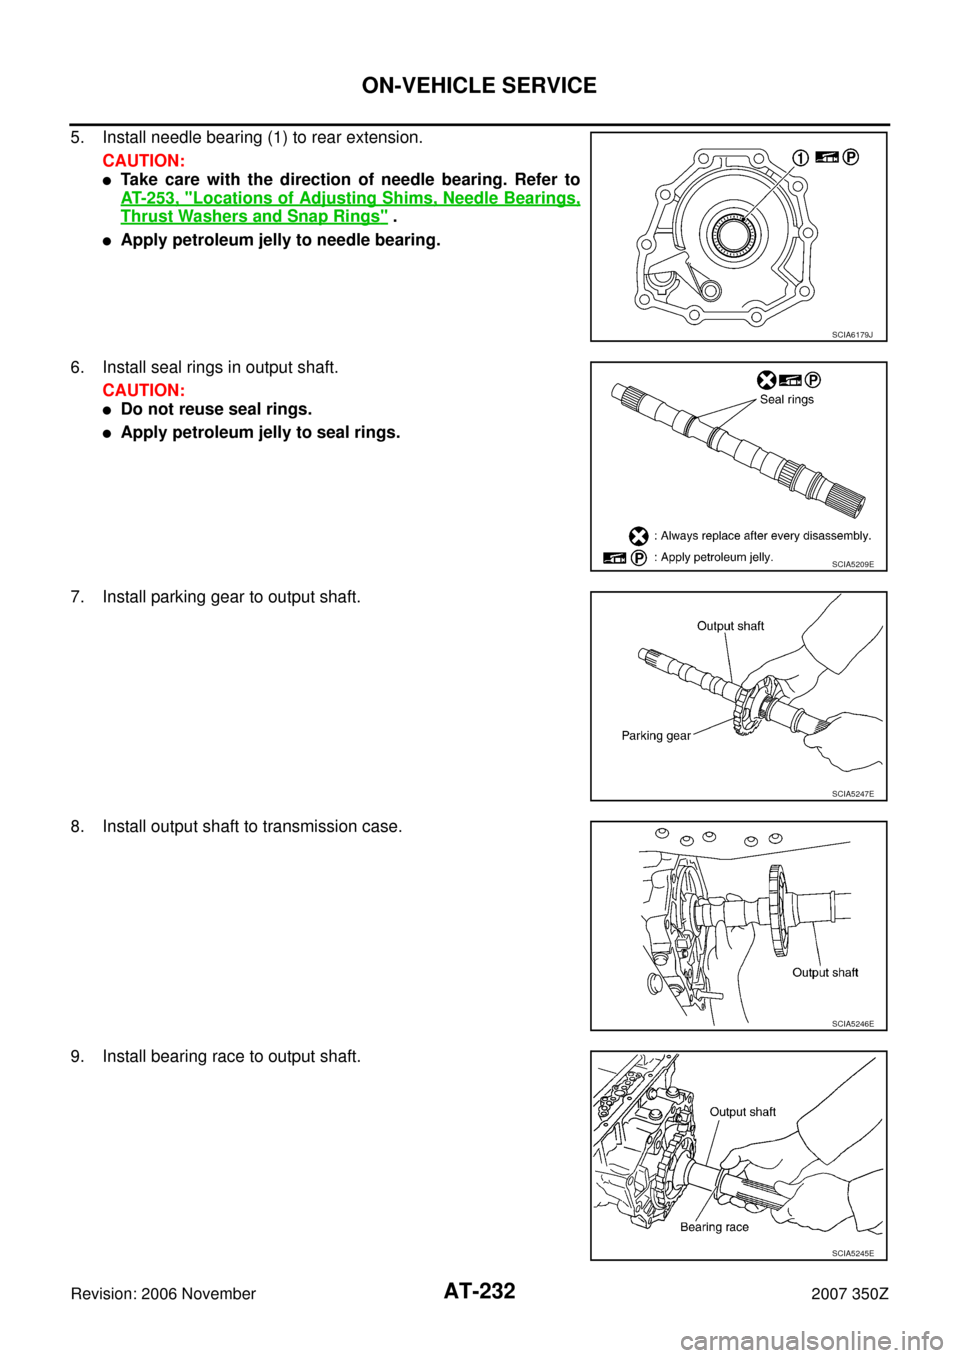 NISSAN 350Z 2007 Z33 Automatic Transmission Workshop Manual AT-232
ON-VEHICLE SERVICE
Revision: 2006 November2007 350Z
5. Install needle bearing (1) to rear extension.
CAUTION:
Take care with the direction of needle bearing. Refer to
AT- 2 5 3 ,  "
Locations 